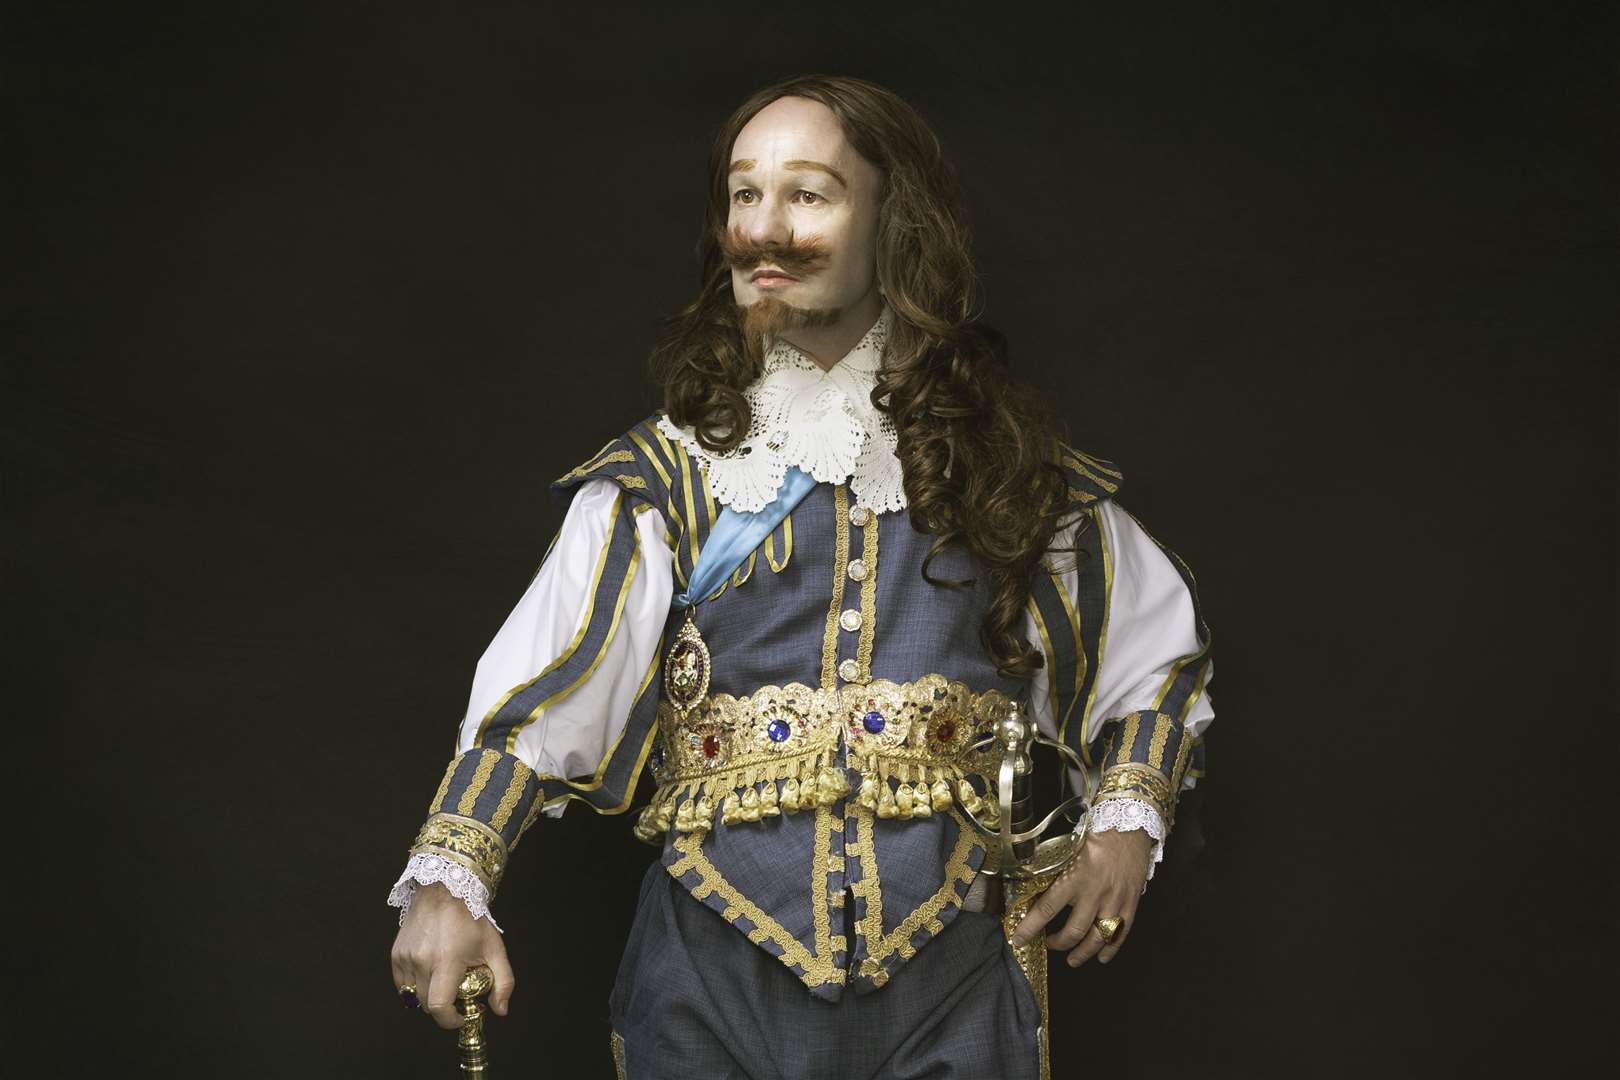 King Charles I was inprisoned on the Isle of Wight at the time